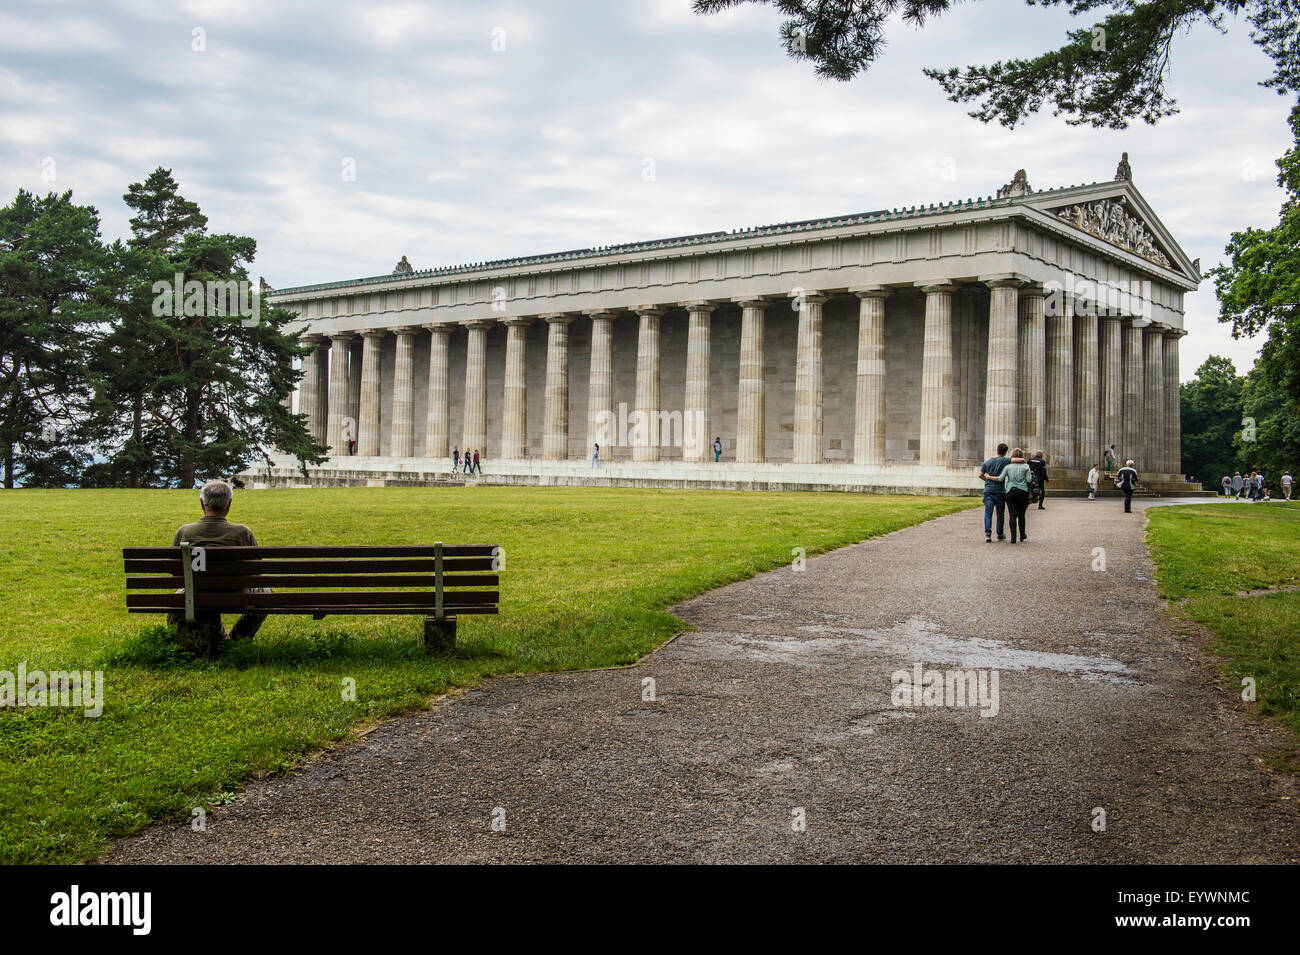 Neo-classical Walhalla hall of fame on the Danube. Bavaria, Germany, Europe Stock Photo